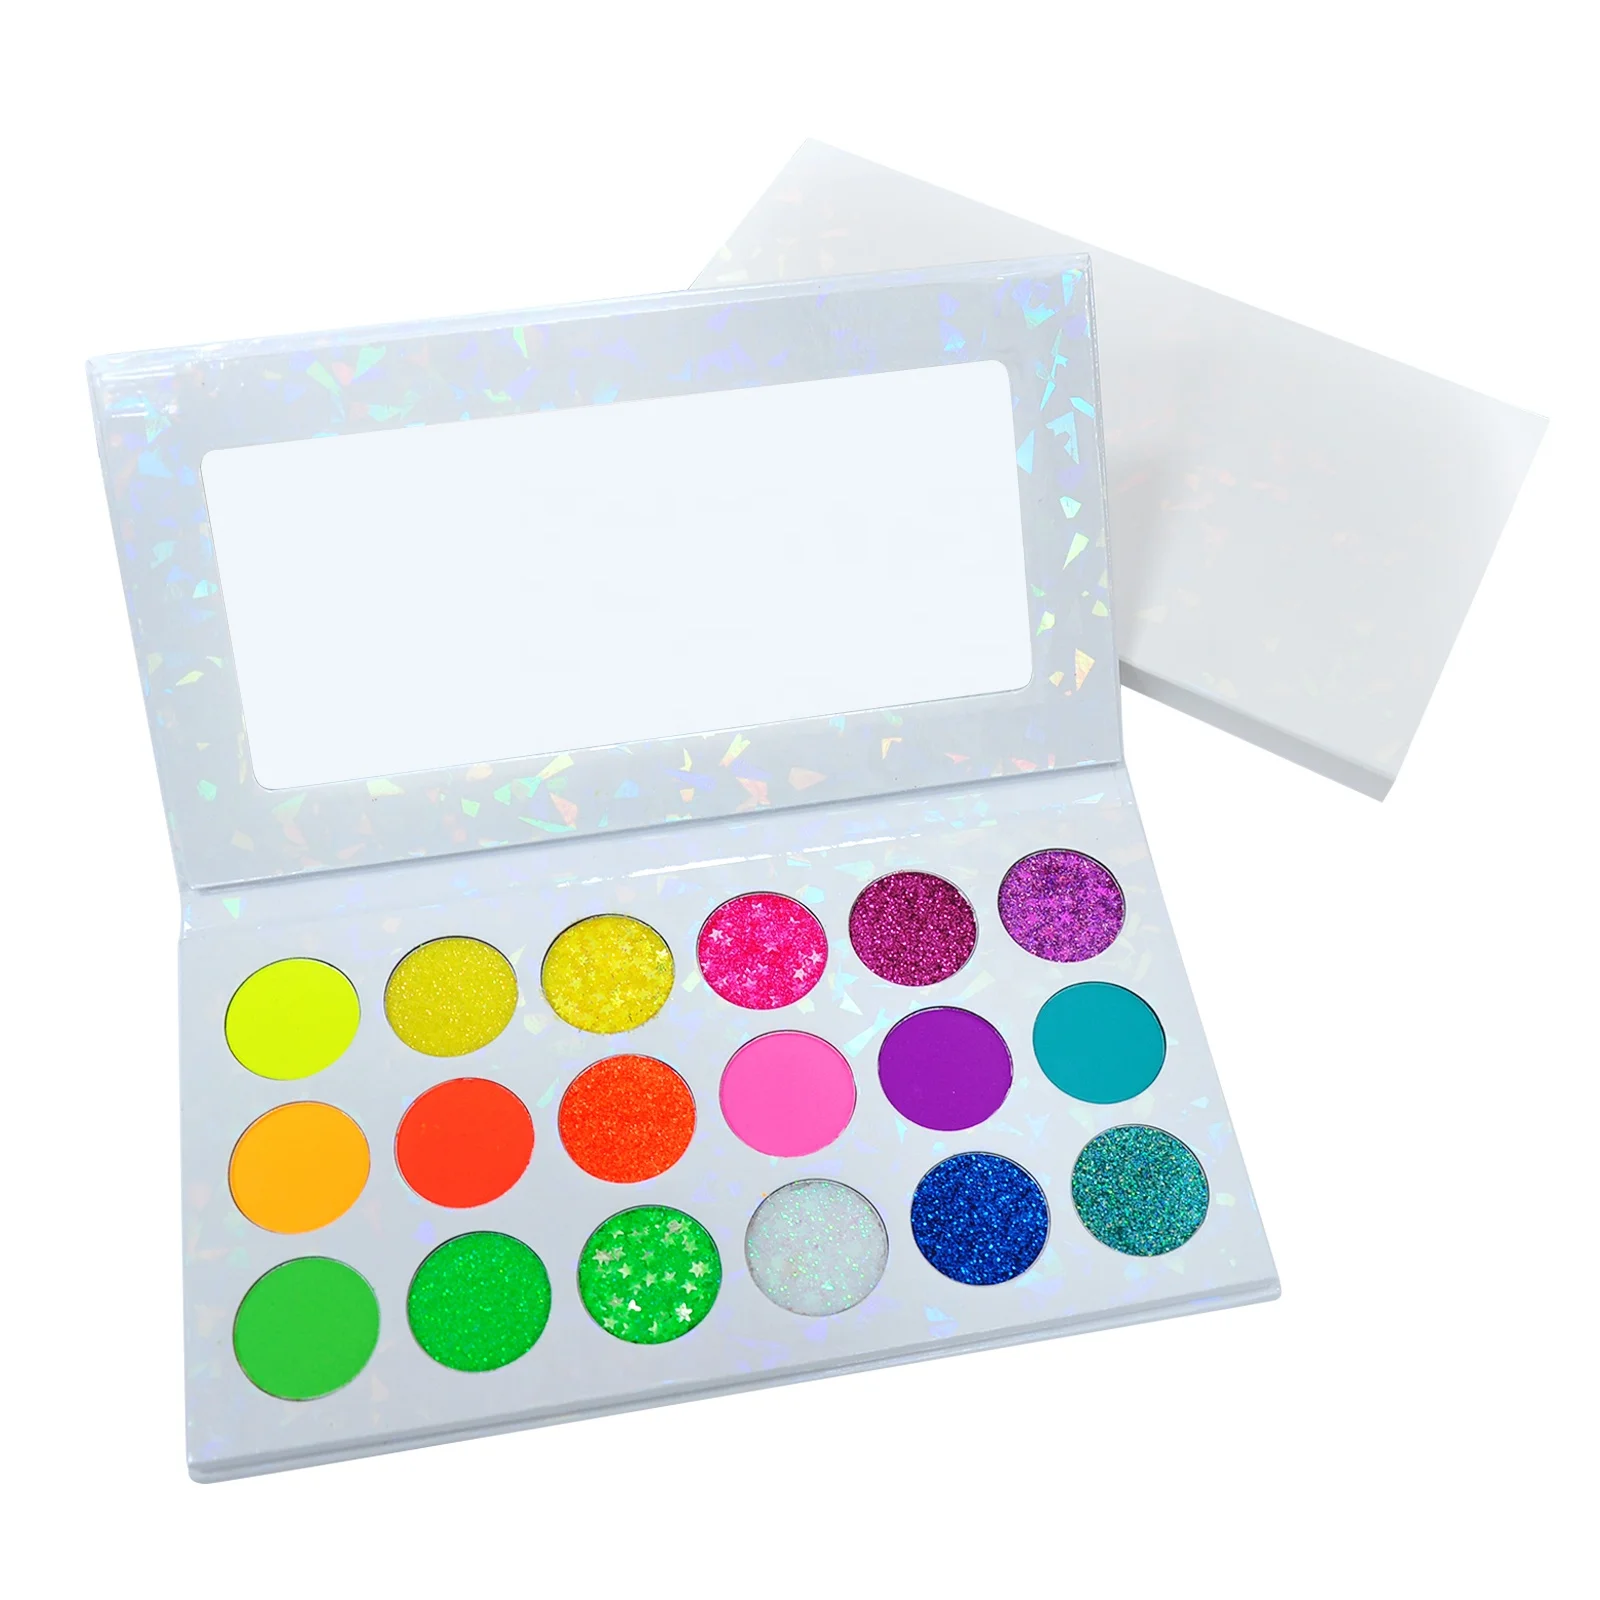 

Makefay Cosmetics NEW wholesale private label 18 color neon high pigmented glitter makeup eyeshadow palette, 18 colors